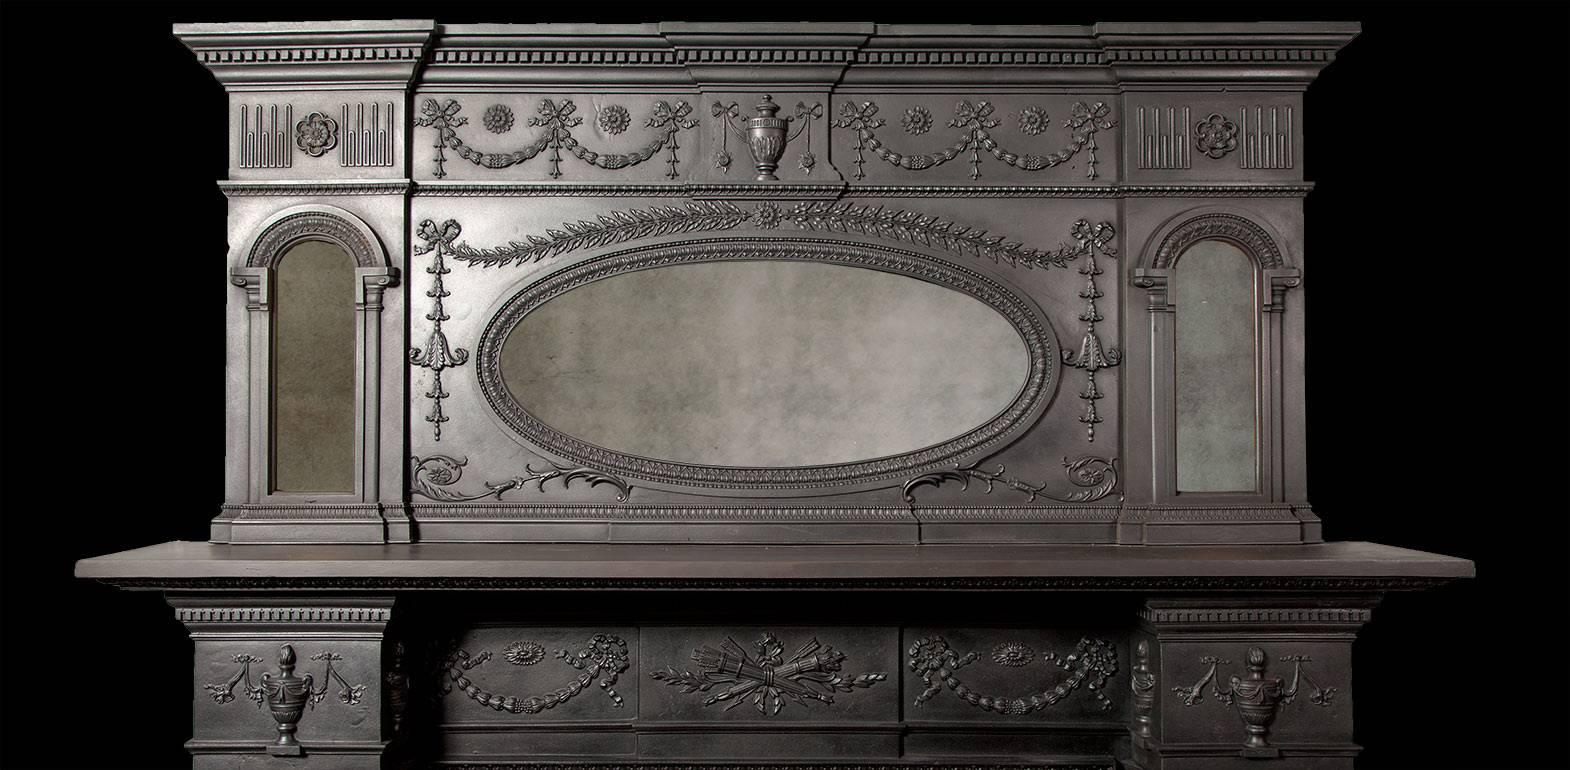 Large antique cast iron fireplace in the Georgian Adam revival style.

Made by the renowned Coalbrookdale Foundry in 1880 to the highest of standards, this black polished metal fireplace features exceptionally fine castings.

The twin fluted